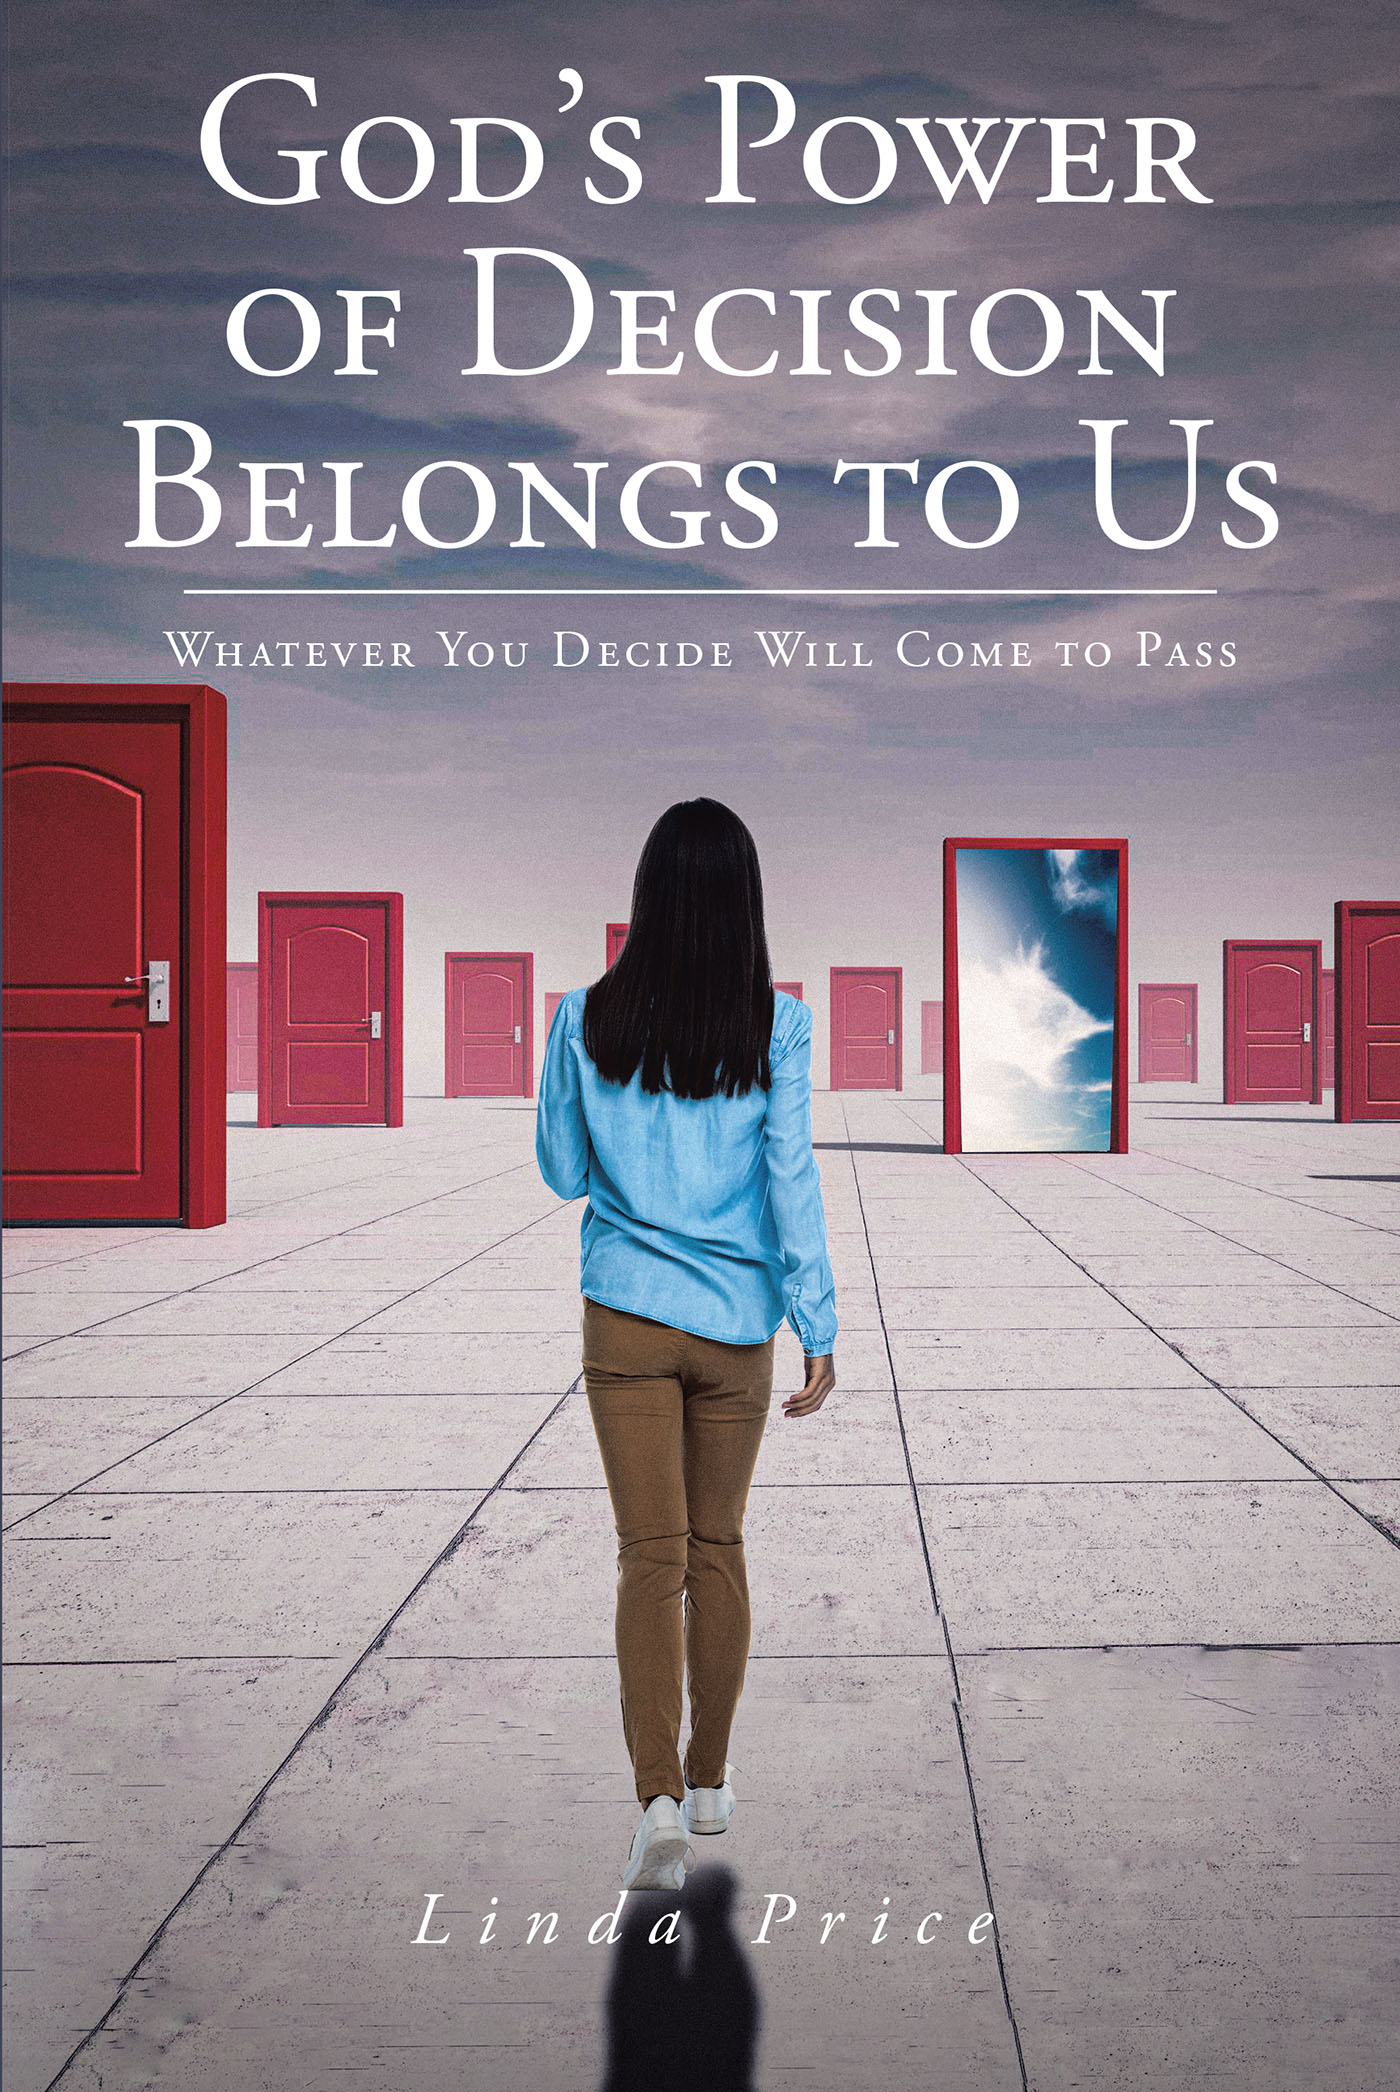 Linda Price’s Newly Released "God’s Power of Decision Belongs to Us: Whatever You Decide Will Come to Pass" is an Insightful Guide to Trusting in God